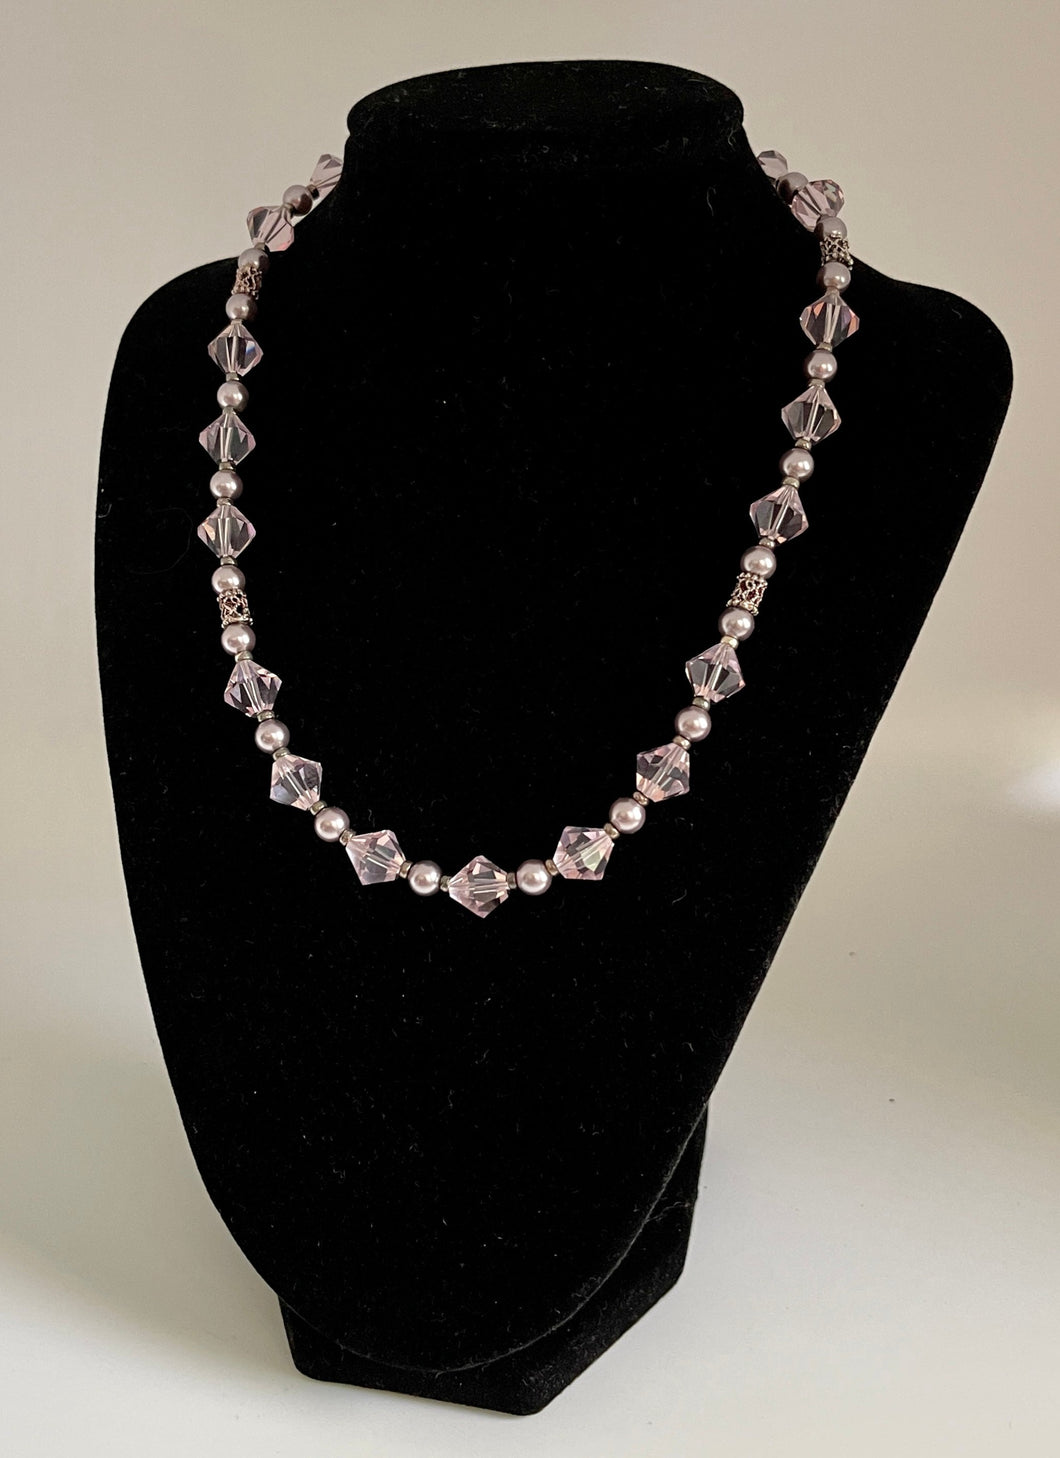 Light Amethyst Austrian Crystals & Pearls 17.5” Necklace with Matching Fish-hook earrings